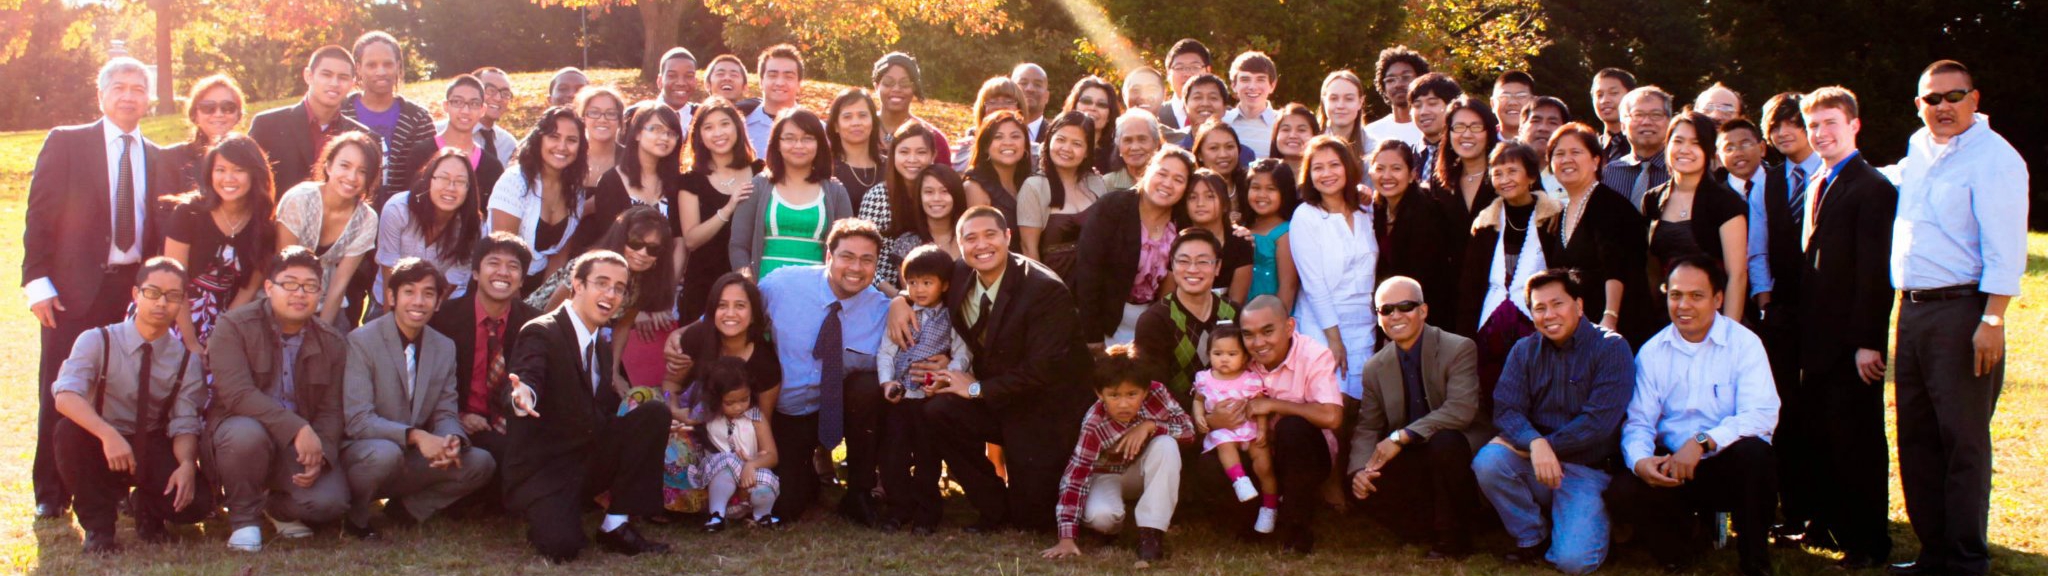 Gospel Life members at our church's first anniversary in 2011